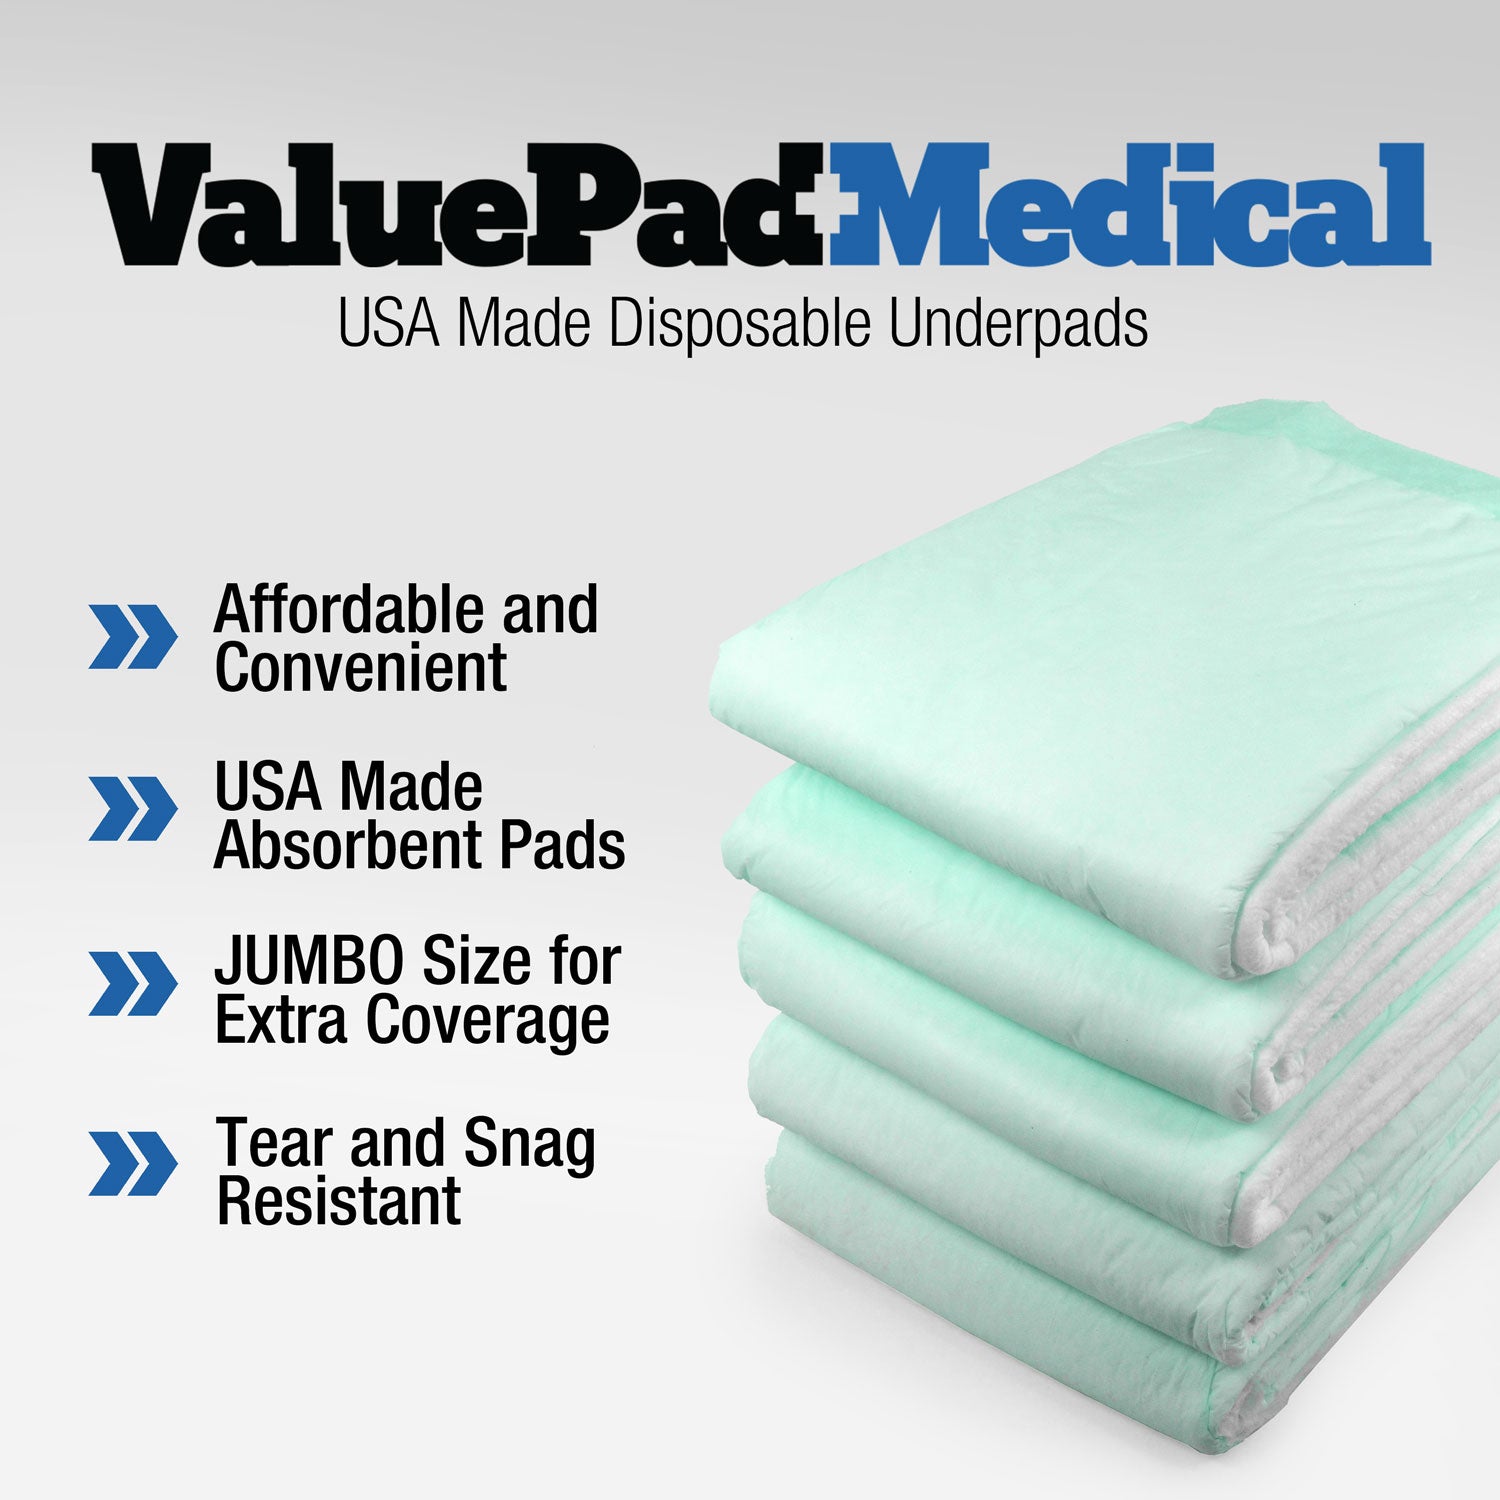 ValuePad USA Disposable Underpads for Incontinence, Bedwetting and Pets, Large 30"x30", 5400 ct WHOLESALE PACK